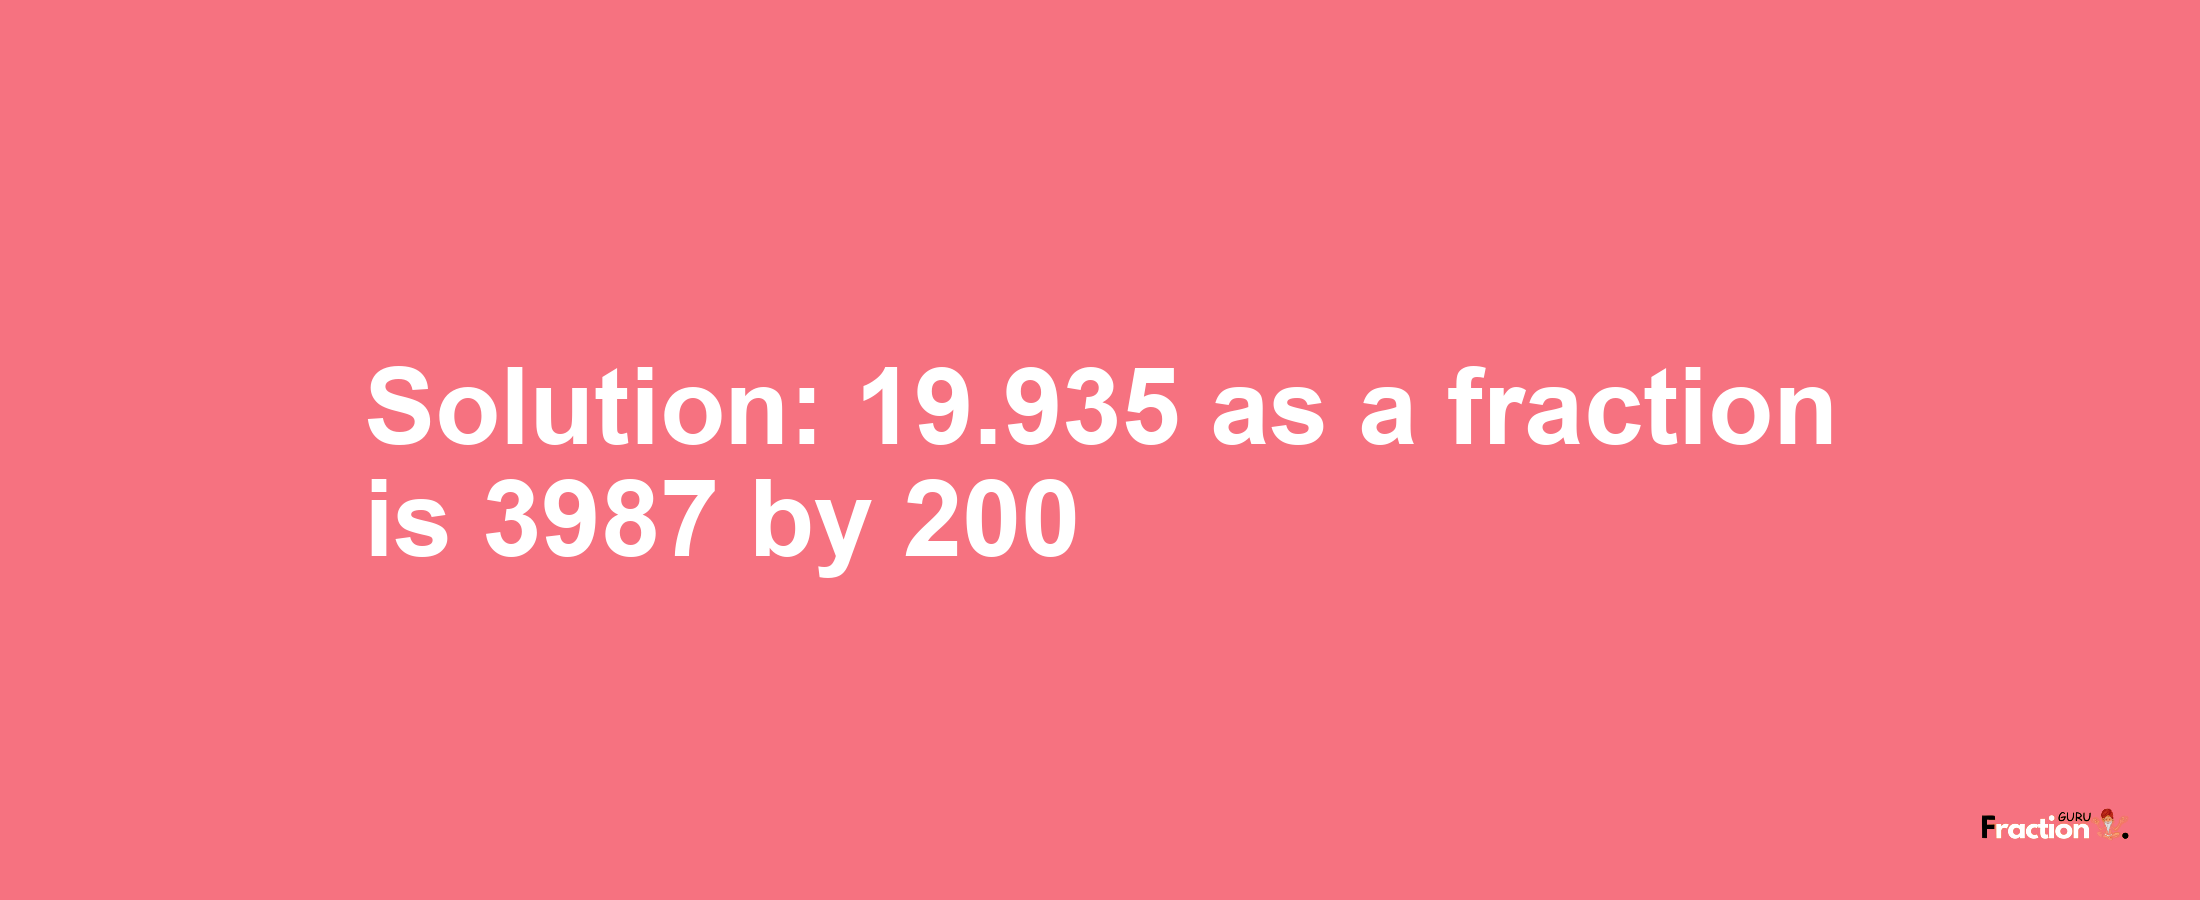 Solution:19.935 as a fraction is 3987/200